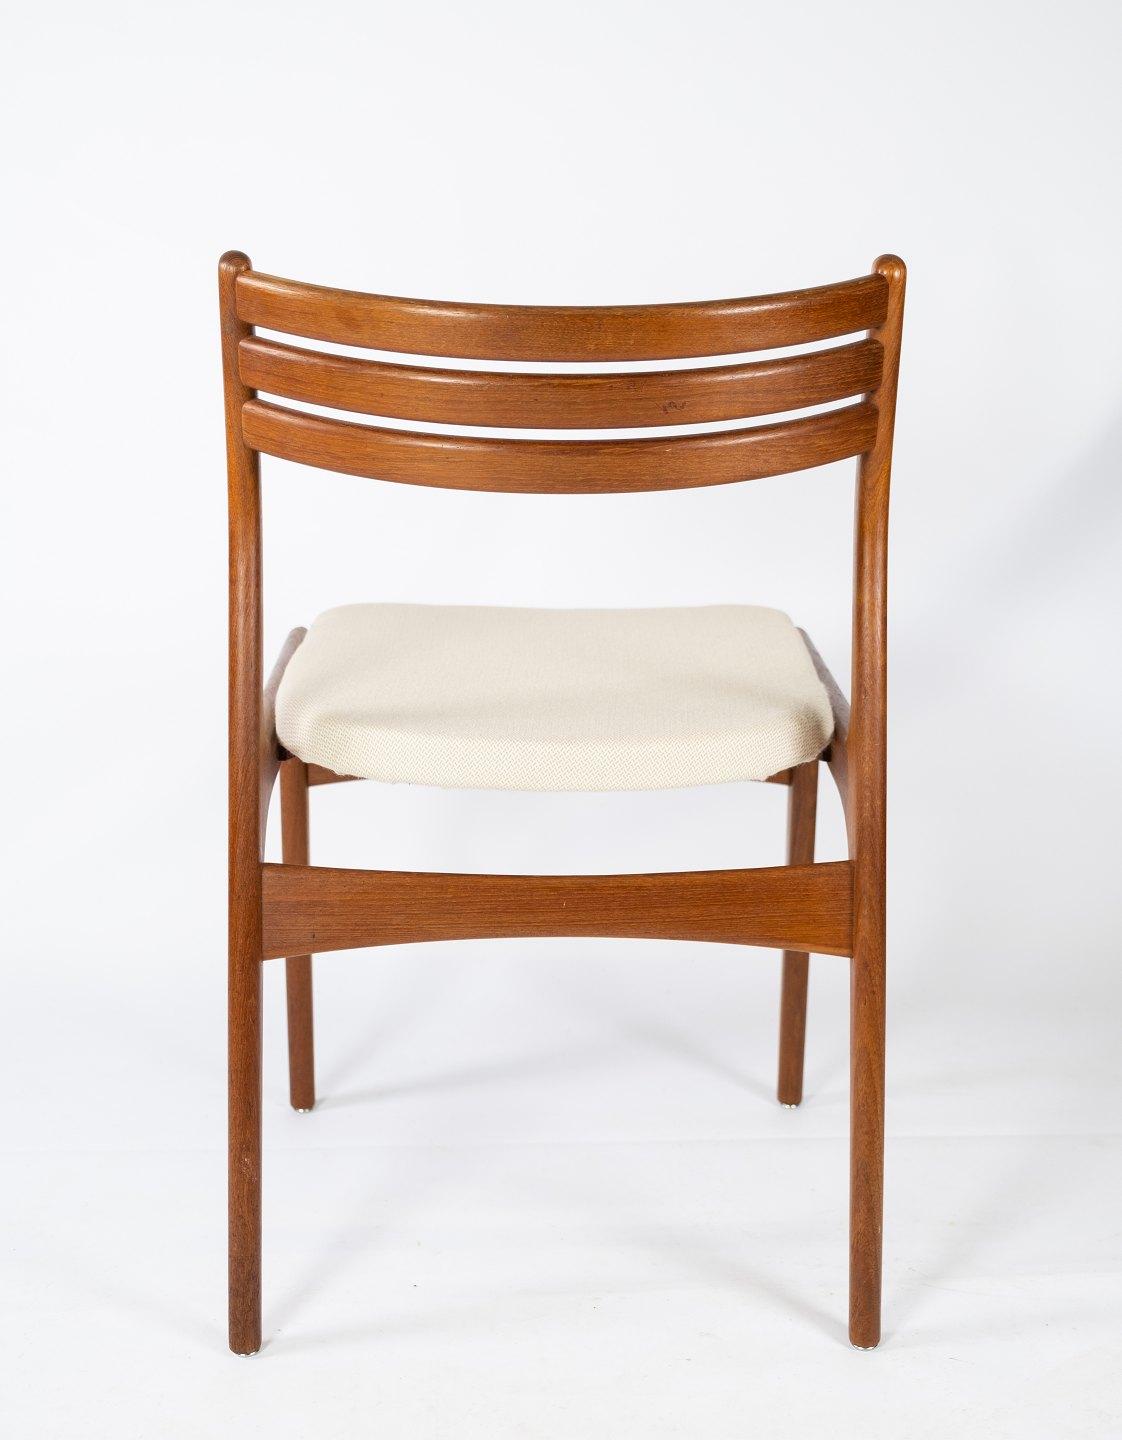 Set of Four Dining Room Chairs in Teak of Danish Design, 1960s For Sale 2